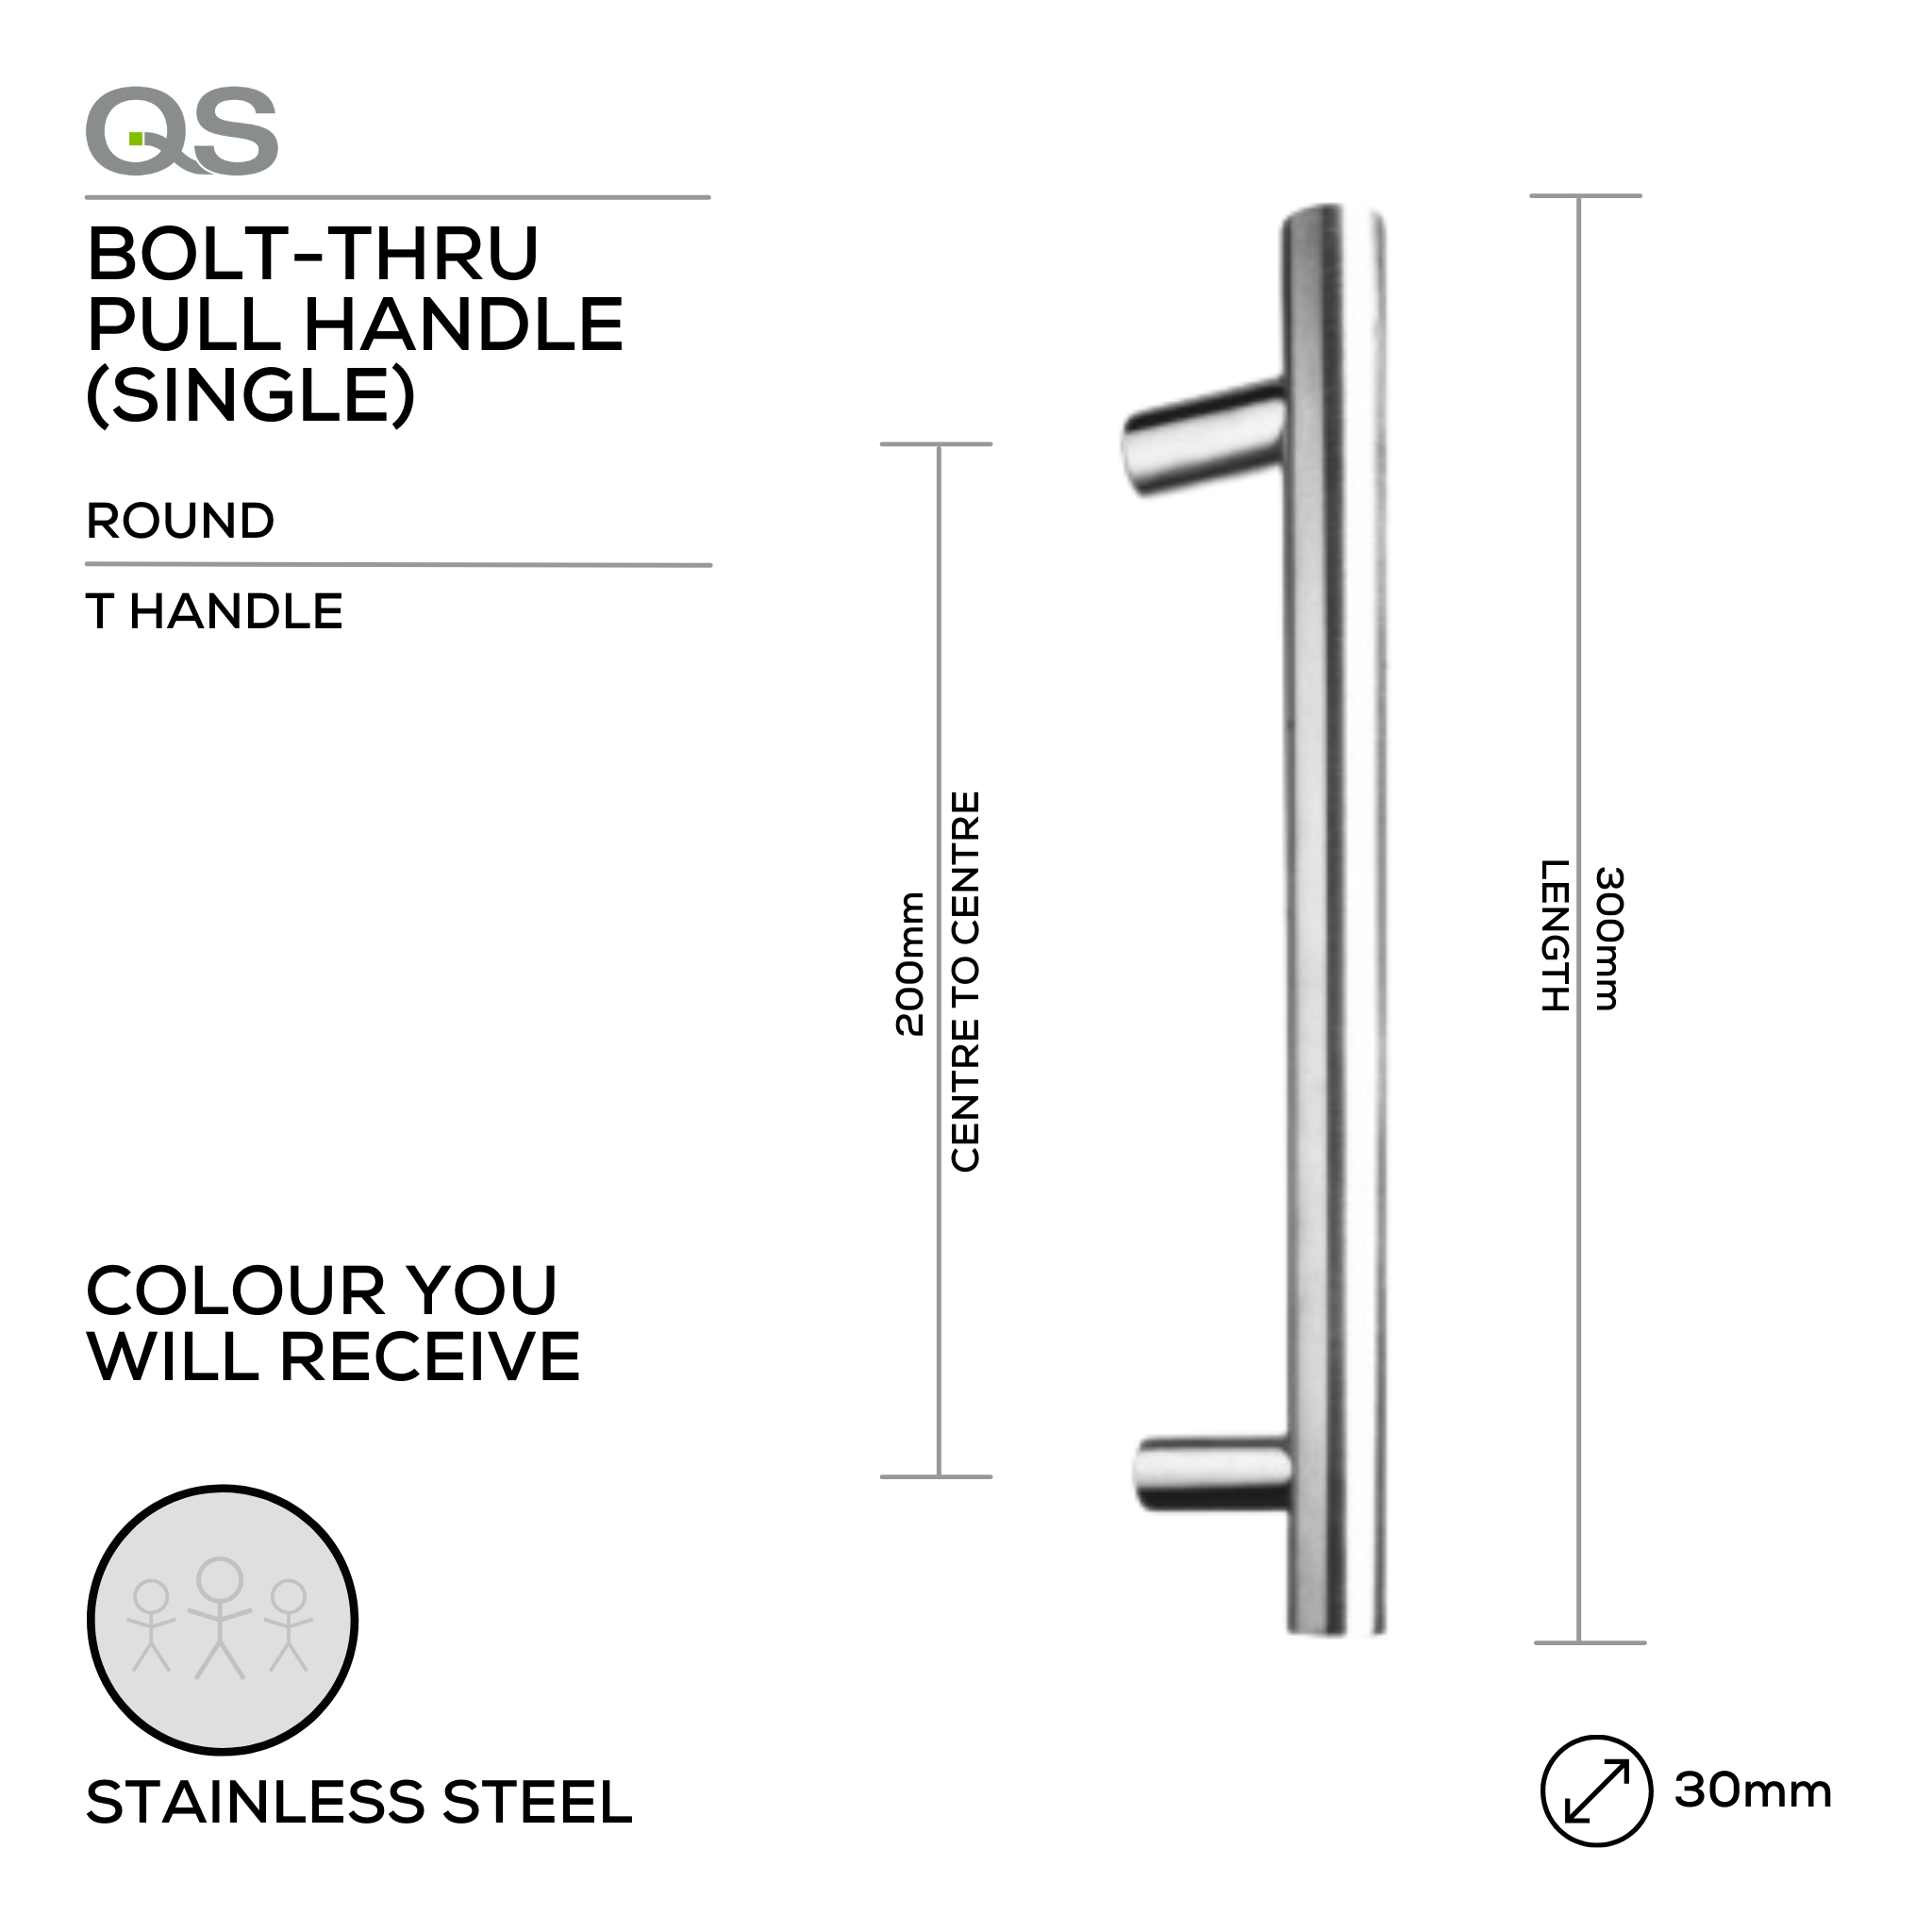 QS2506/1 T Handle, Pull Handle, Round, T Handle, BoltThru, 30mm (Ø) x 300mm (l) x 200mm (ctc), Stainless Steel, QS